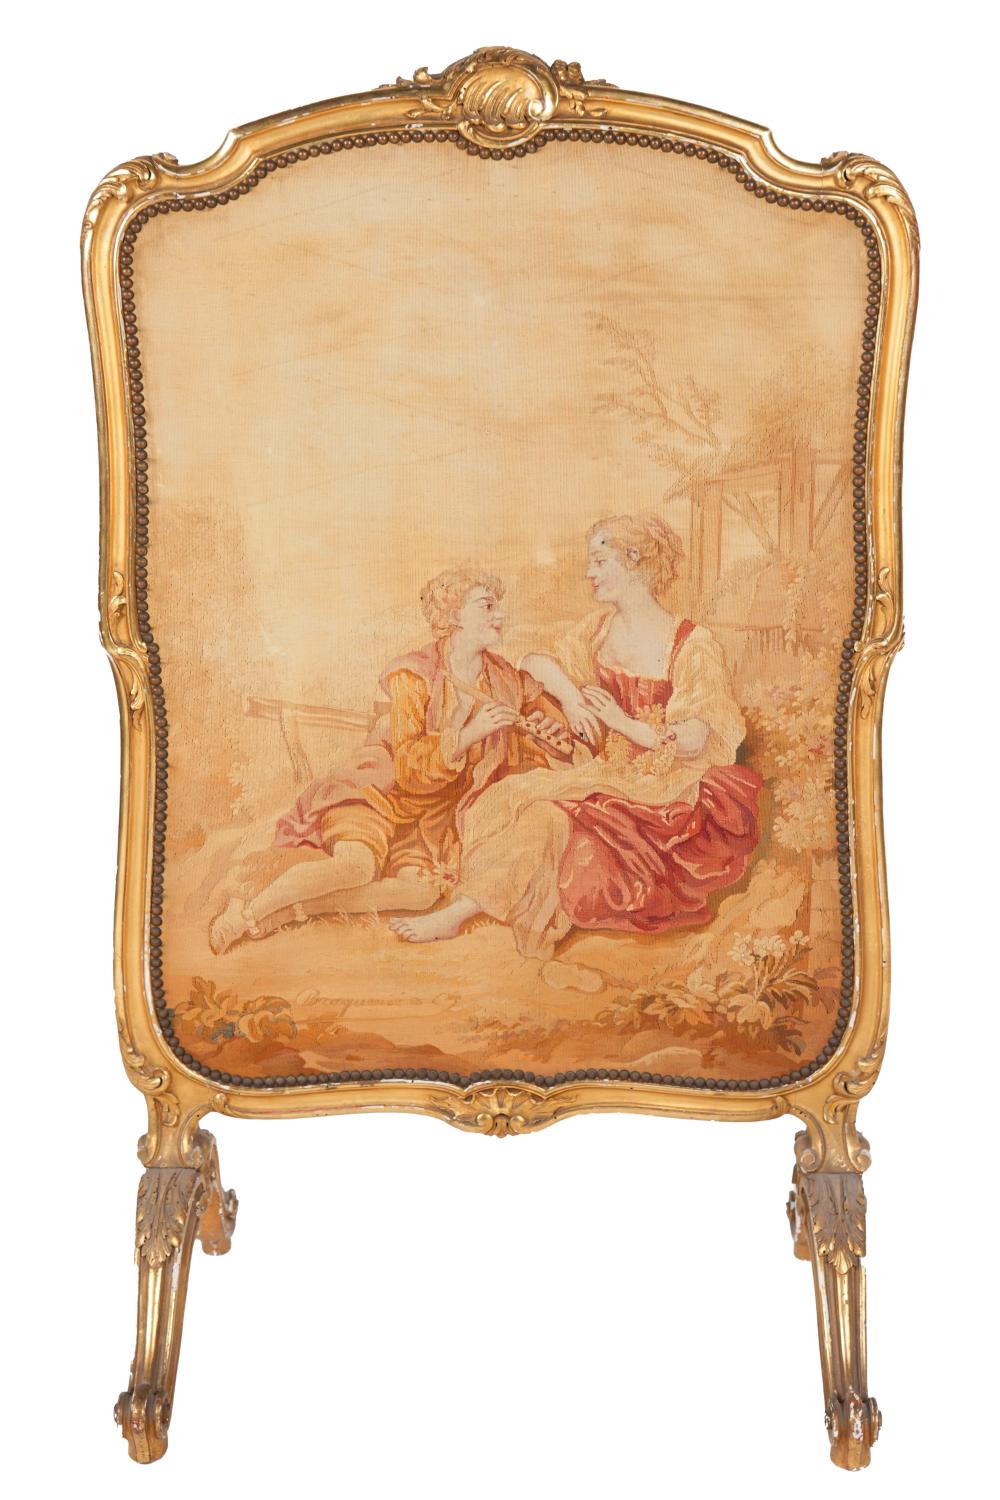 FRENCH GILTWOOD TAPESTRY FIRE 33260f